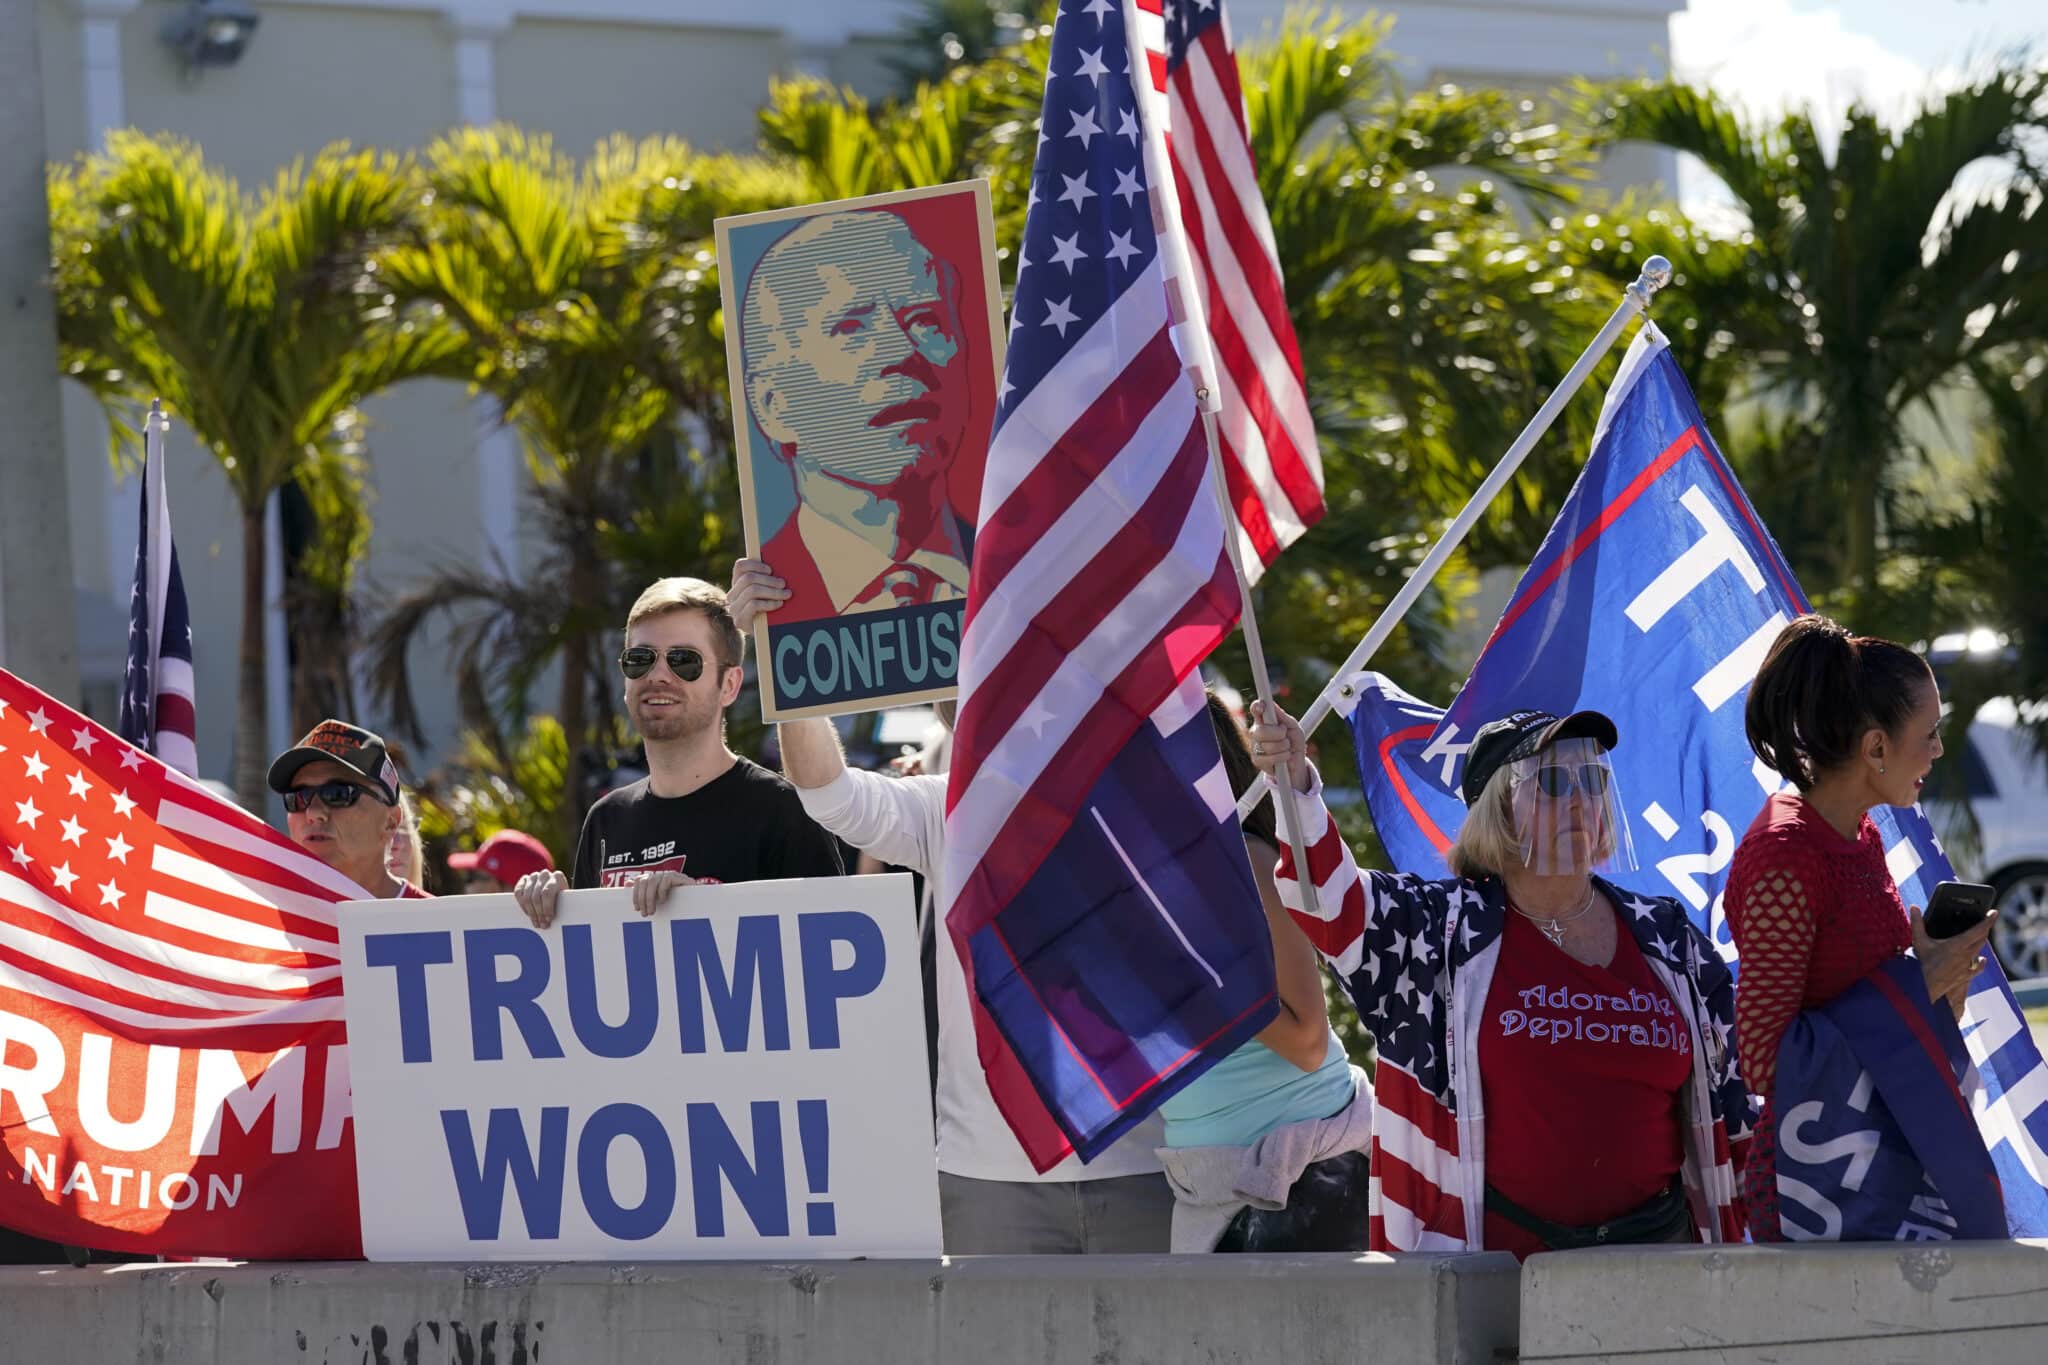 Supporters of President Donald Trump wait for the motorcade on the road to Mar-a-Lago, Trump's Palm Beach estate, on Wednesday, Jan. 20, 2021, in West Palm Beach, Fla. (AP Photo/Lynne Sladky)